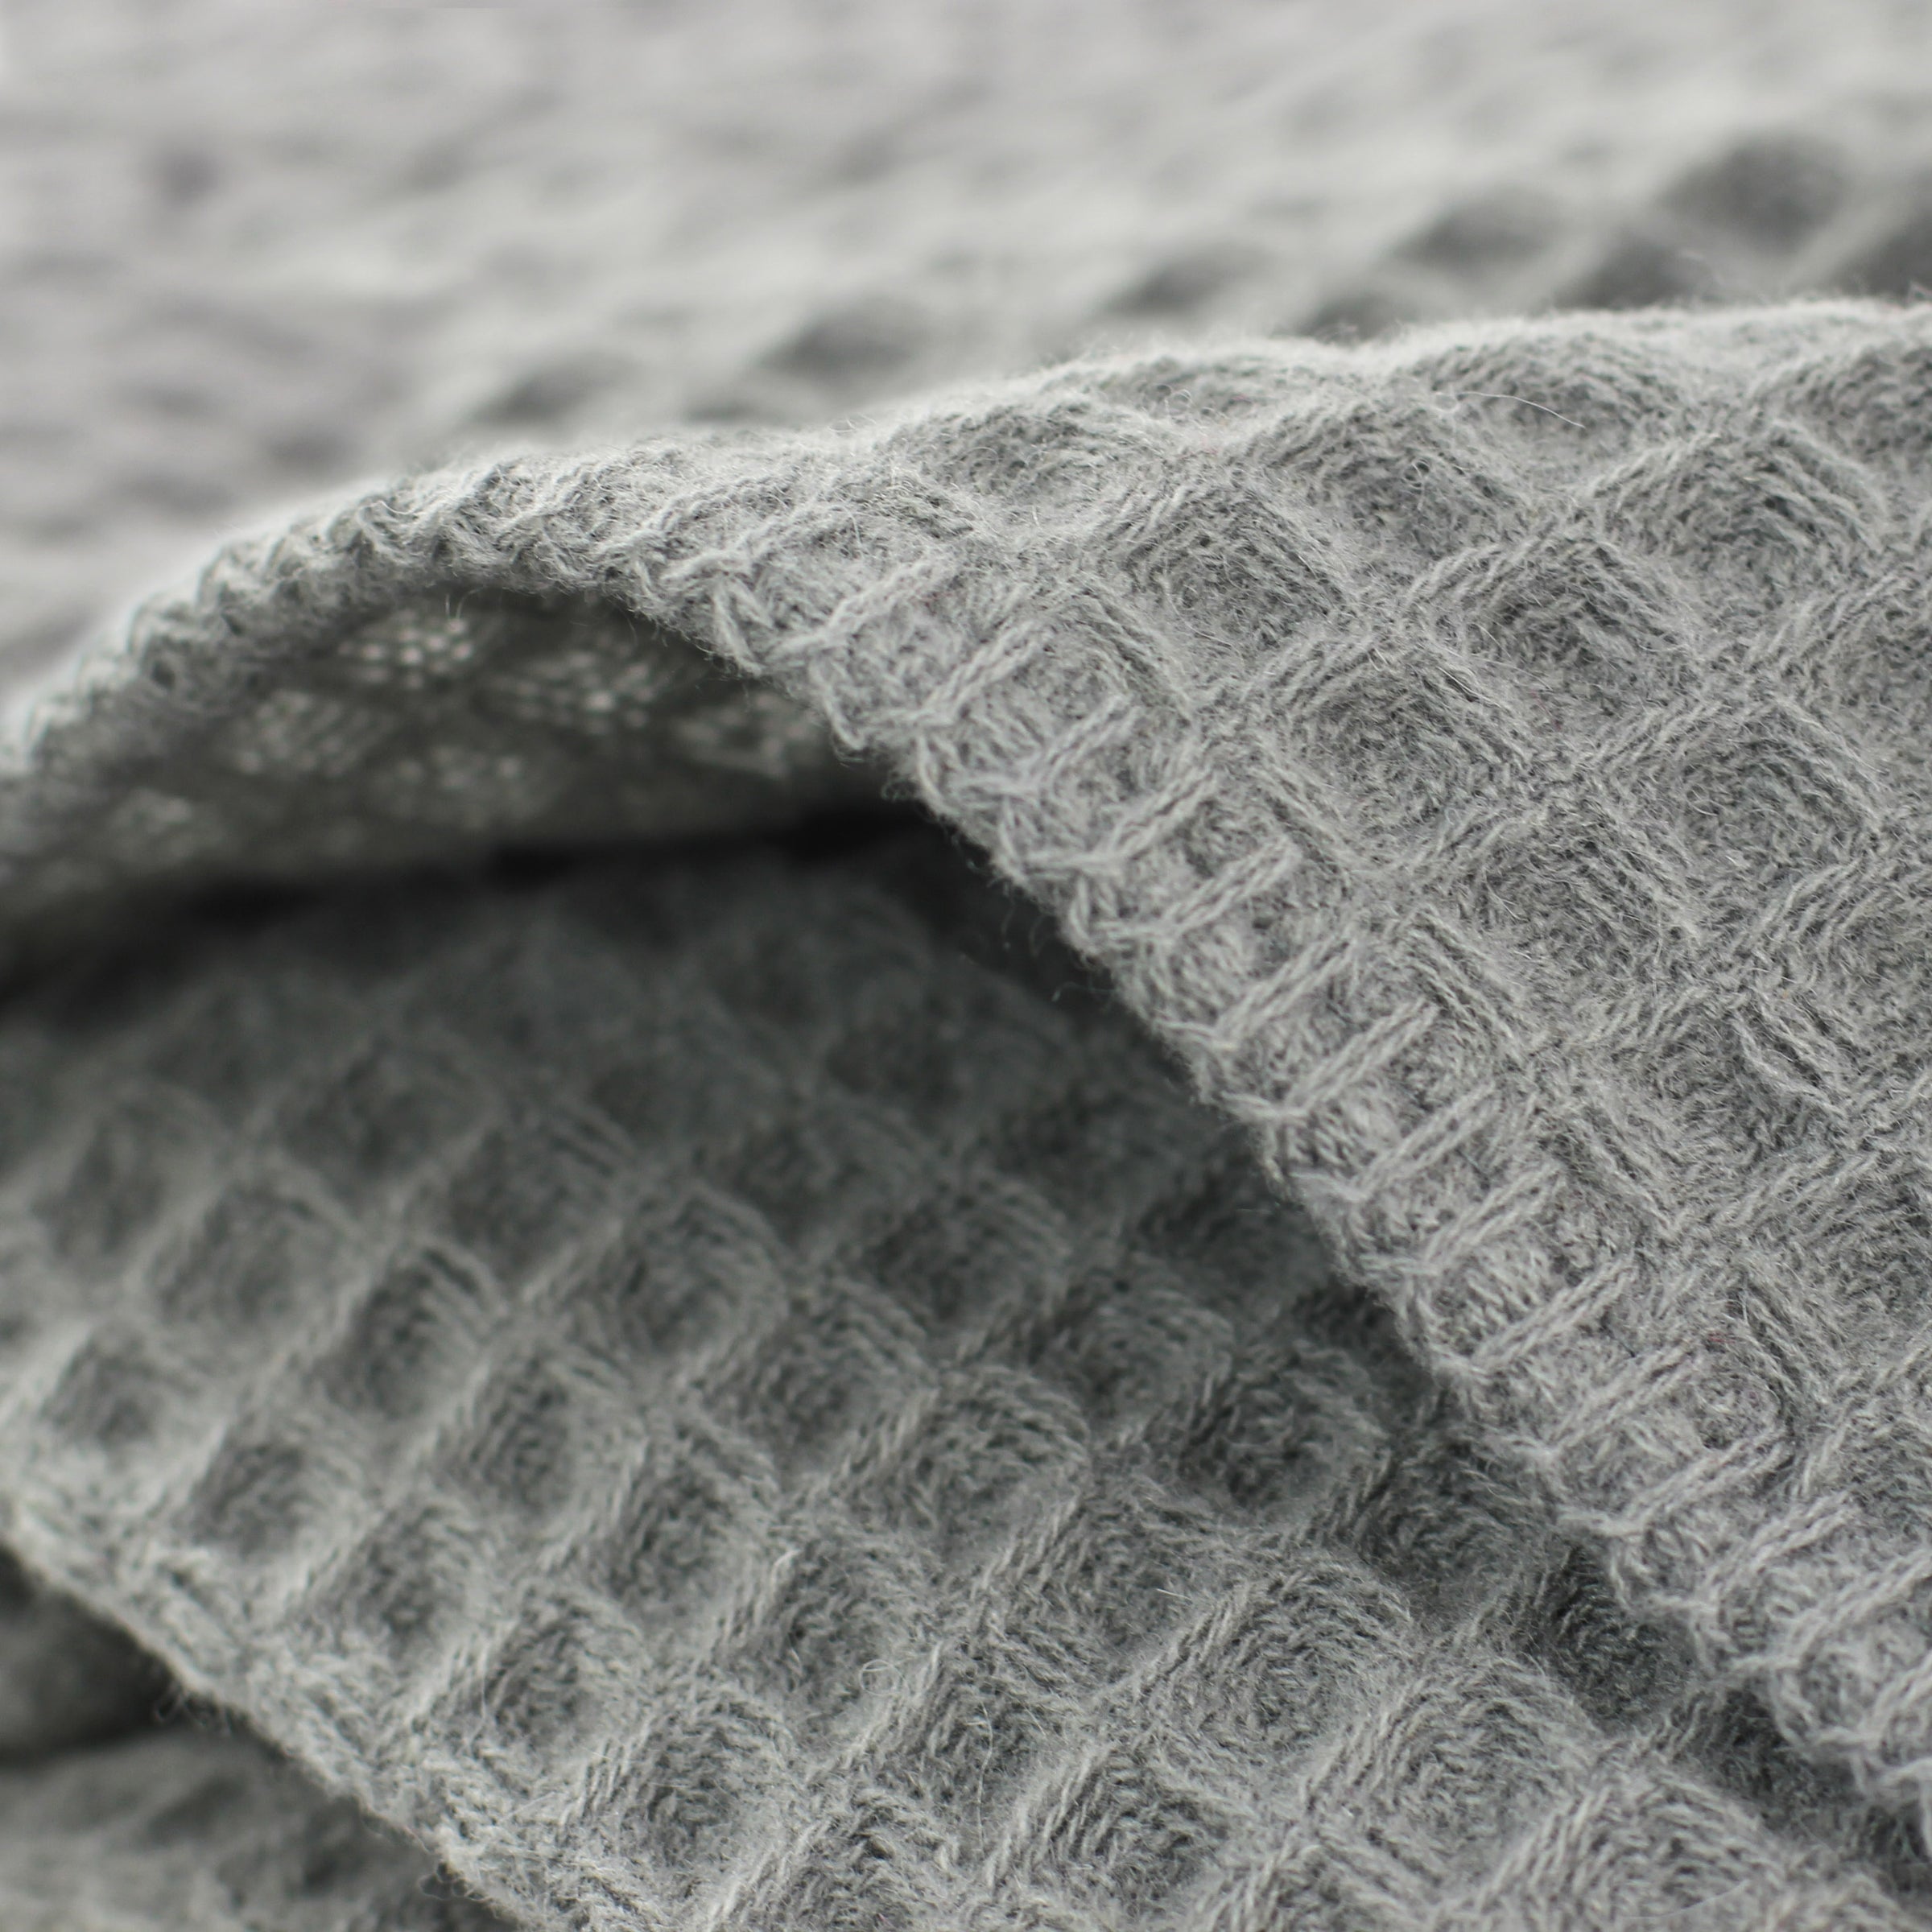 Classic 100% Cotton Waffle Weave Knit Blanket